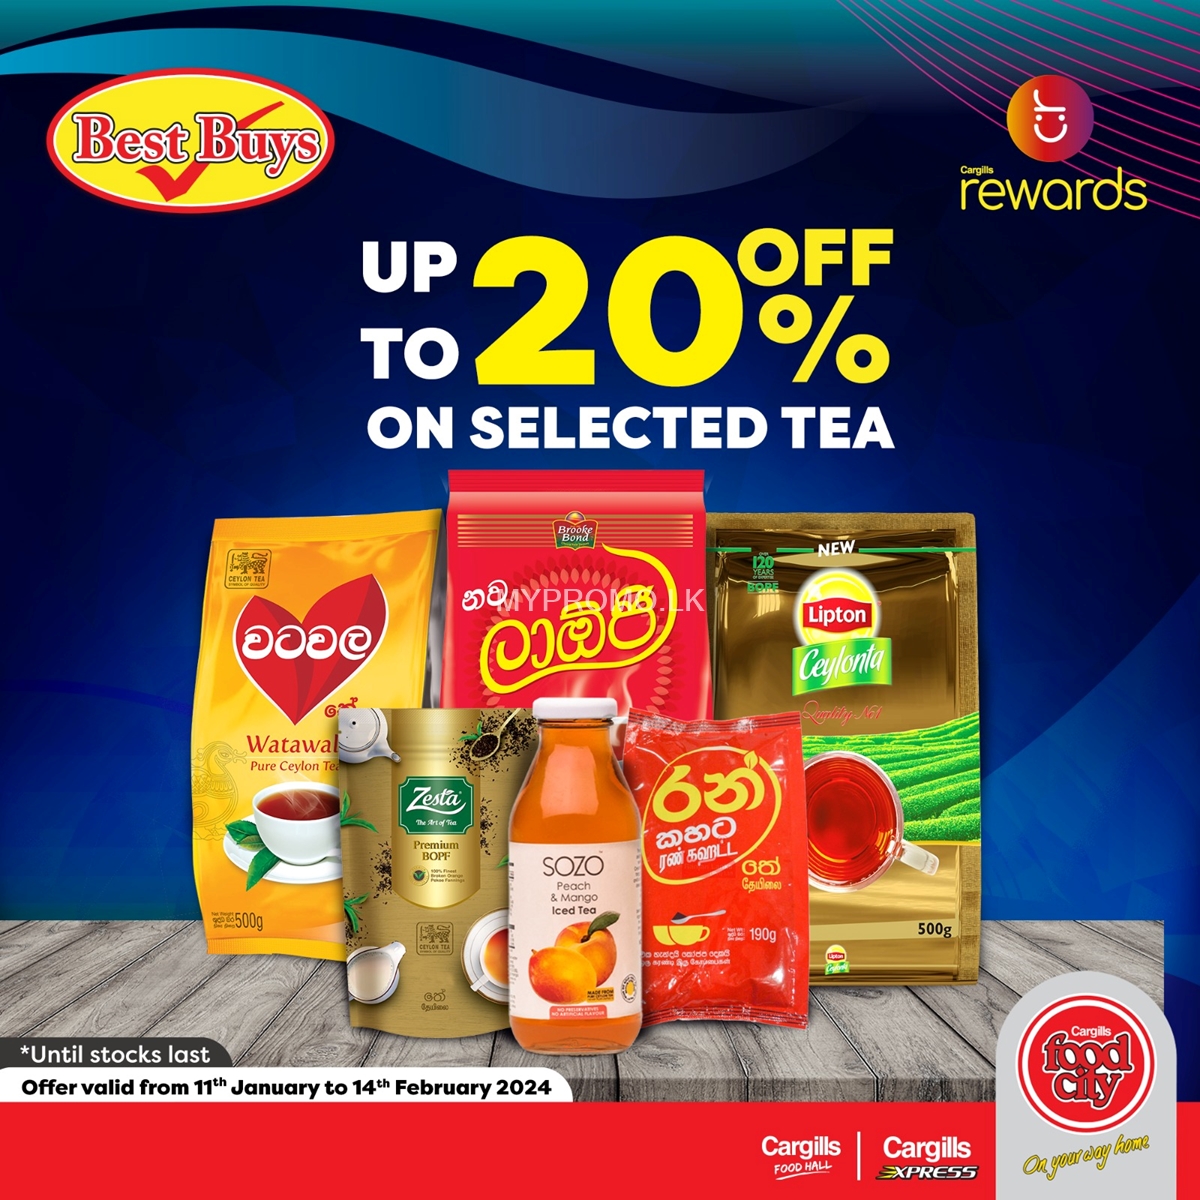 Up to 20% Off on Selected Tea at Cargills Food City